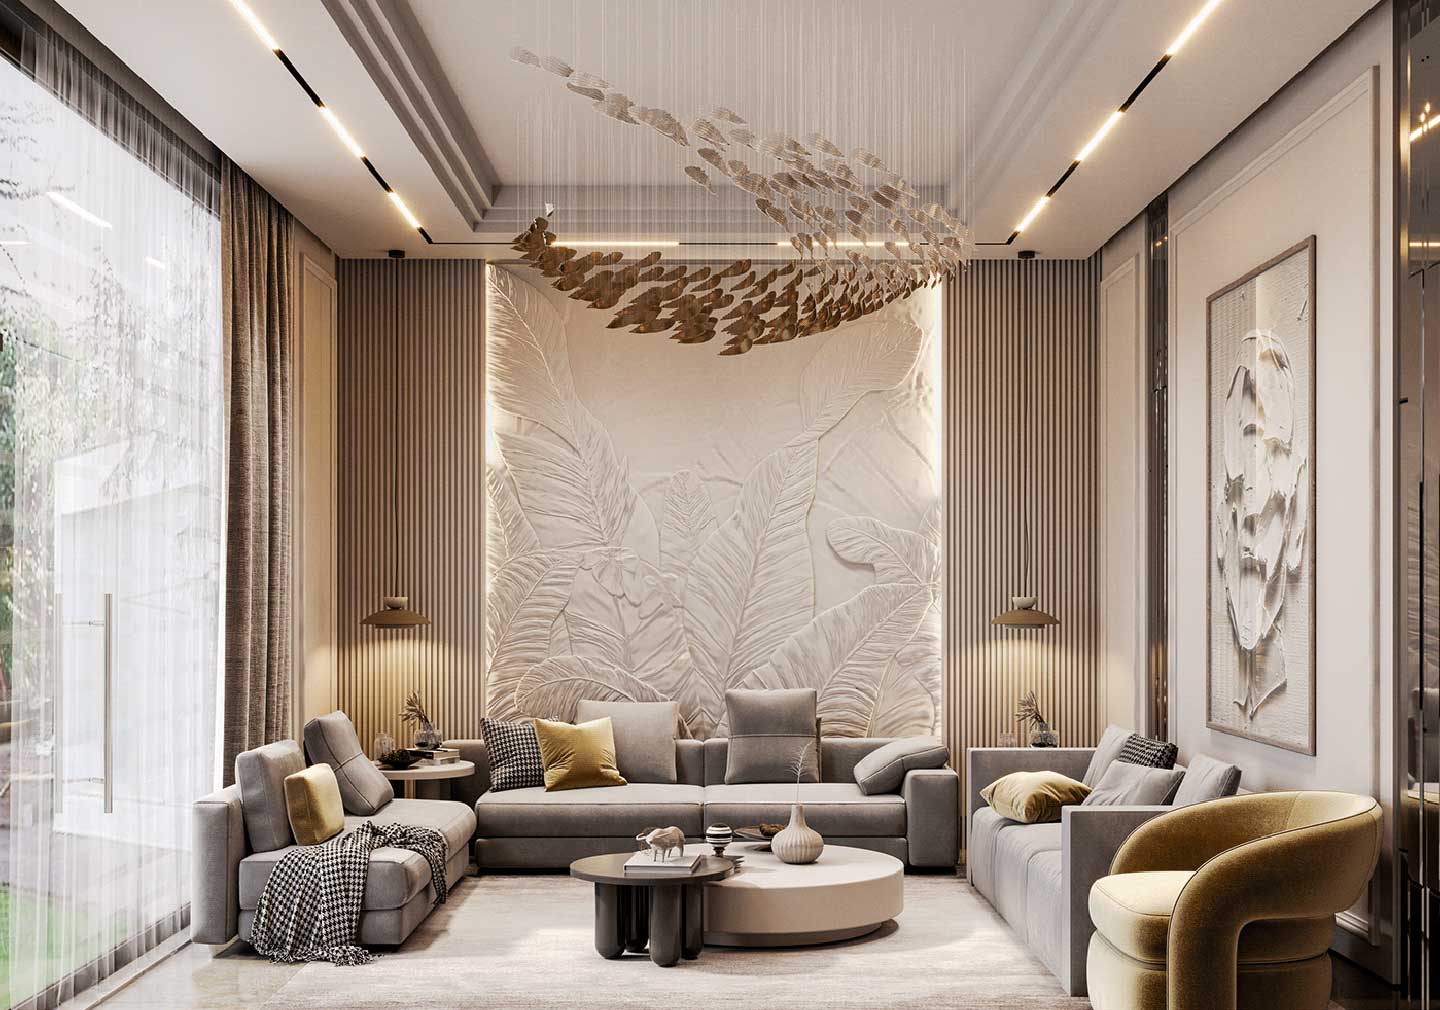 Layered Luxury - Creating Textural Harmony in Interior Design 